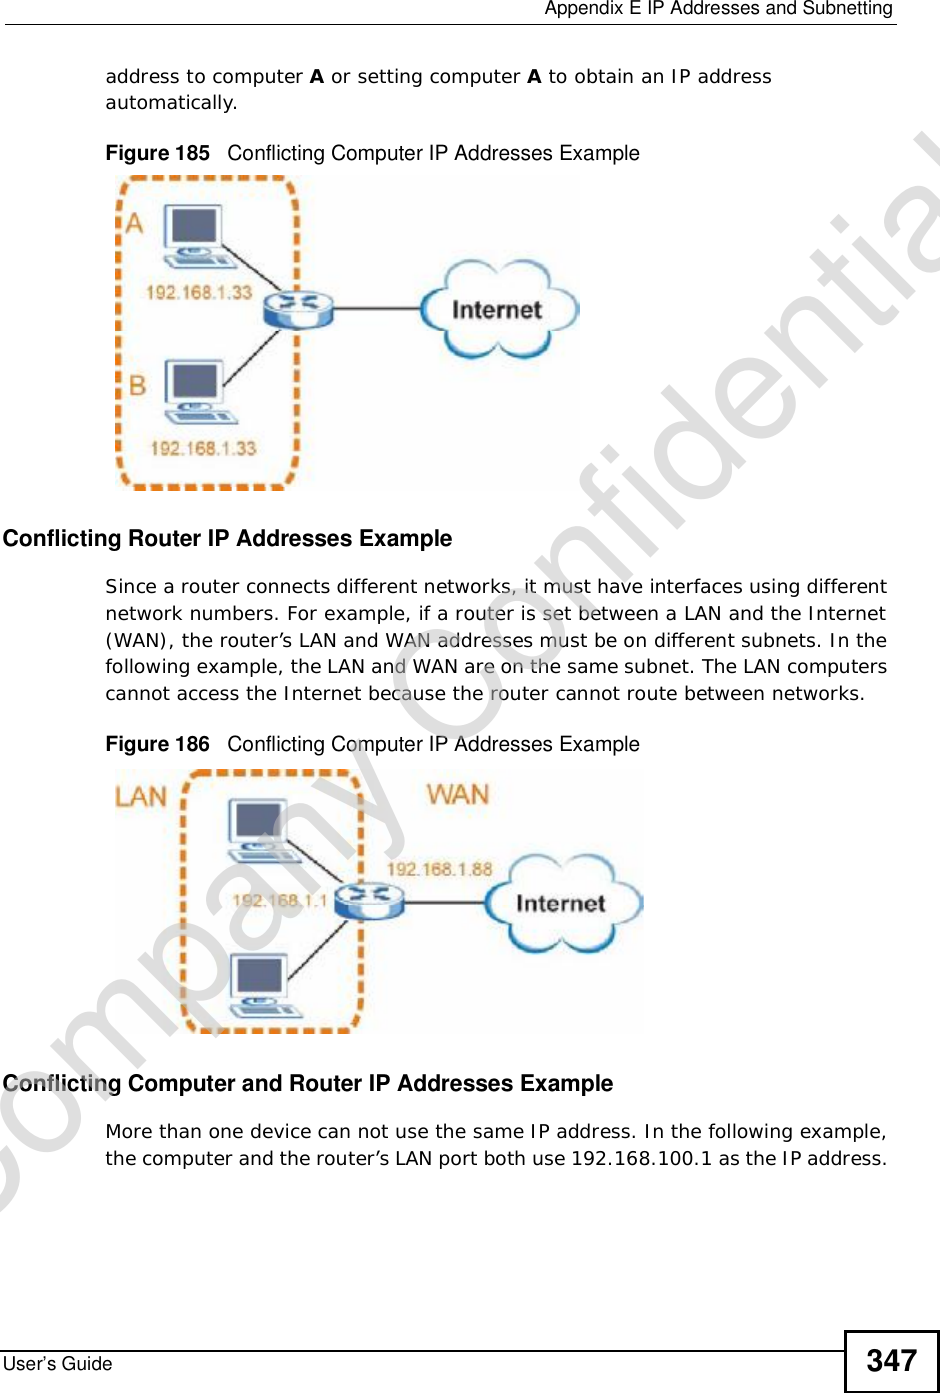  Appendix EIP Addresses and SubnettingUser’s Guide 347address to computer A or setting computer A to obtain an IP address automatically.  Figure 185   Conflicting Computer IP Addresses ExampleConflicting Router IP Addresses ExampleSince a router connects different networks, it must have interfaces using different network numbers. For example, if a router is set between a LAN and the Internet (WAN), the router’s LAN and WAN addresses must be on different subnets. In the following example, the LAN and WAN are on the same subnet. The LAN computers cannot access the Internet because the router cannot route between networks.Figure 186   Conflicting Computer IP Addresses ExampleConflicting Computer and Router IP Addresses ExampleMore than one device can not use the same IP address. In the following example, the computer and the router’s LAN port both use 192.168.100.1 as the IP address. Company Confidential